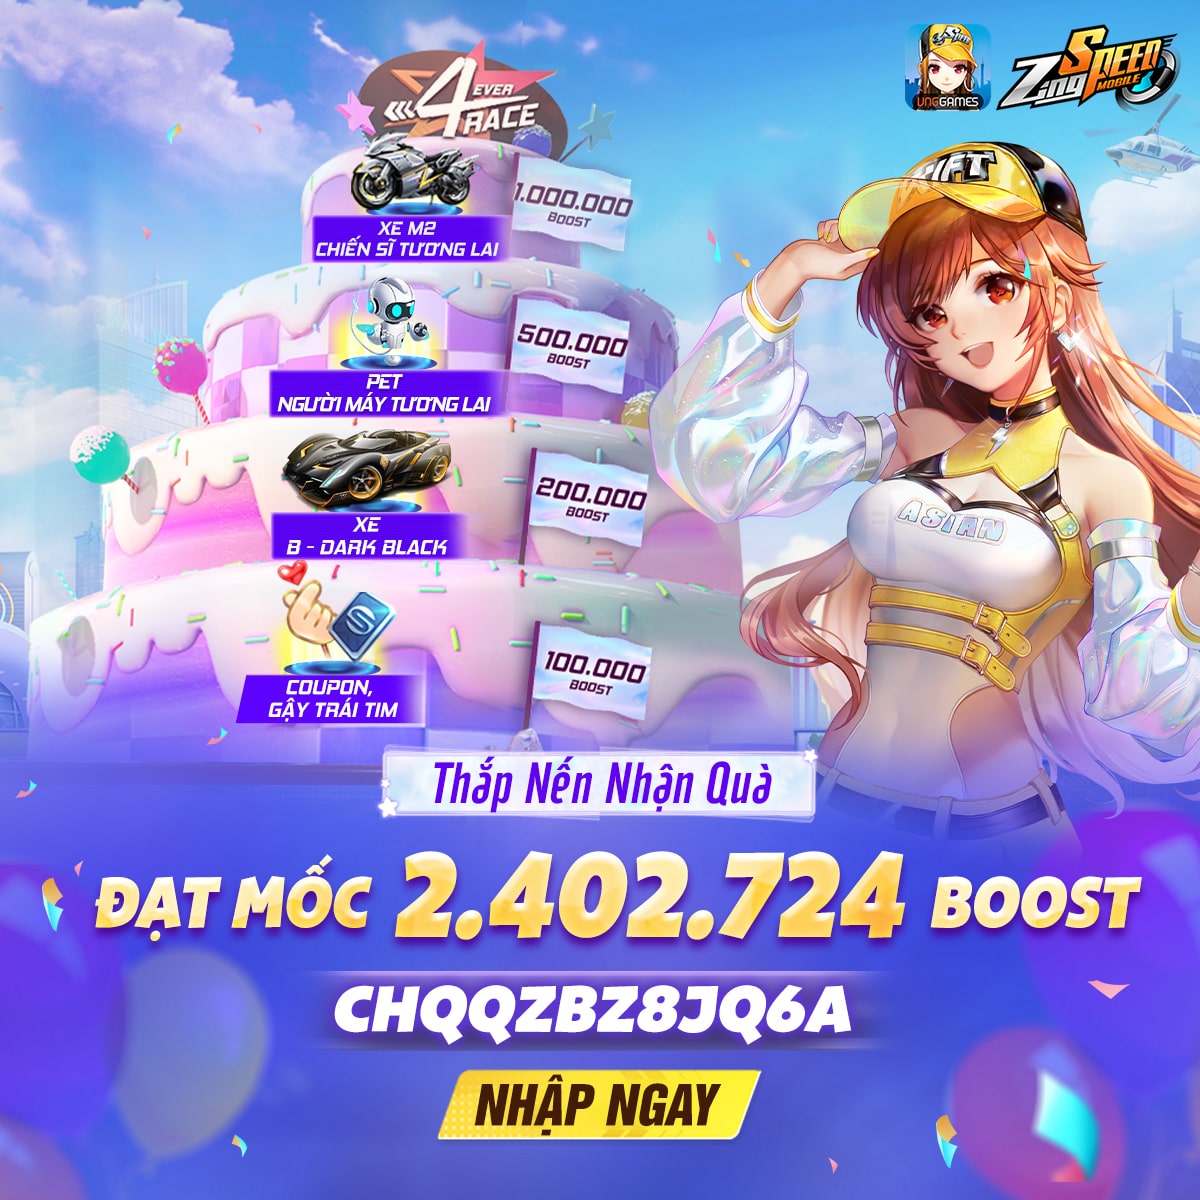 ZingSpeed Mobile tặng iPhone 14 Pro Max cho game thủ